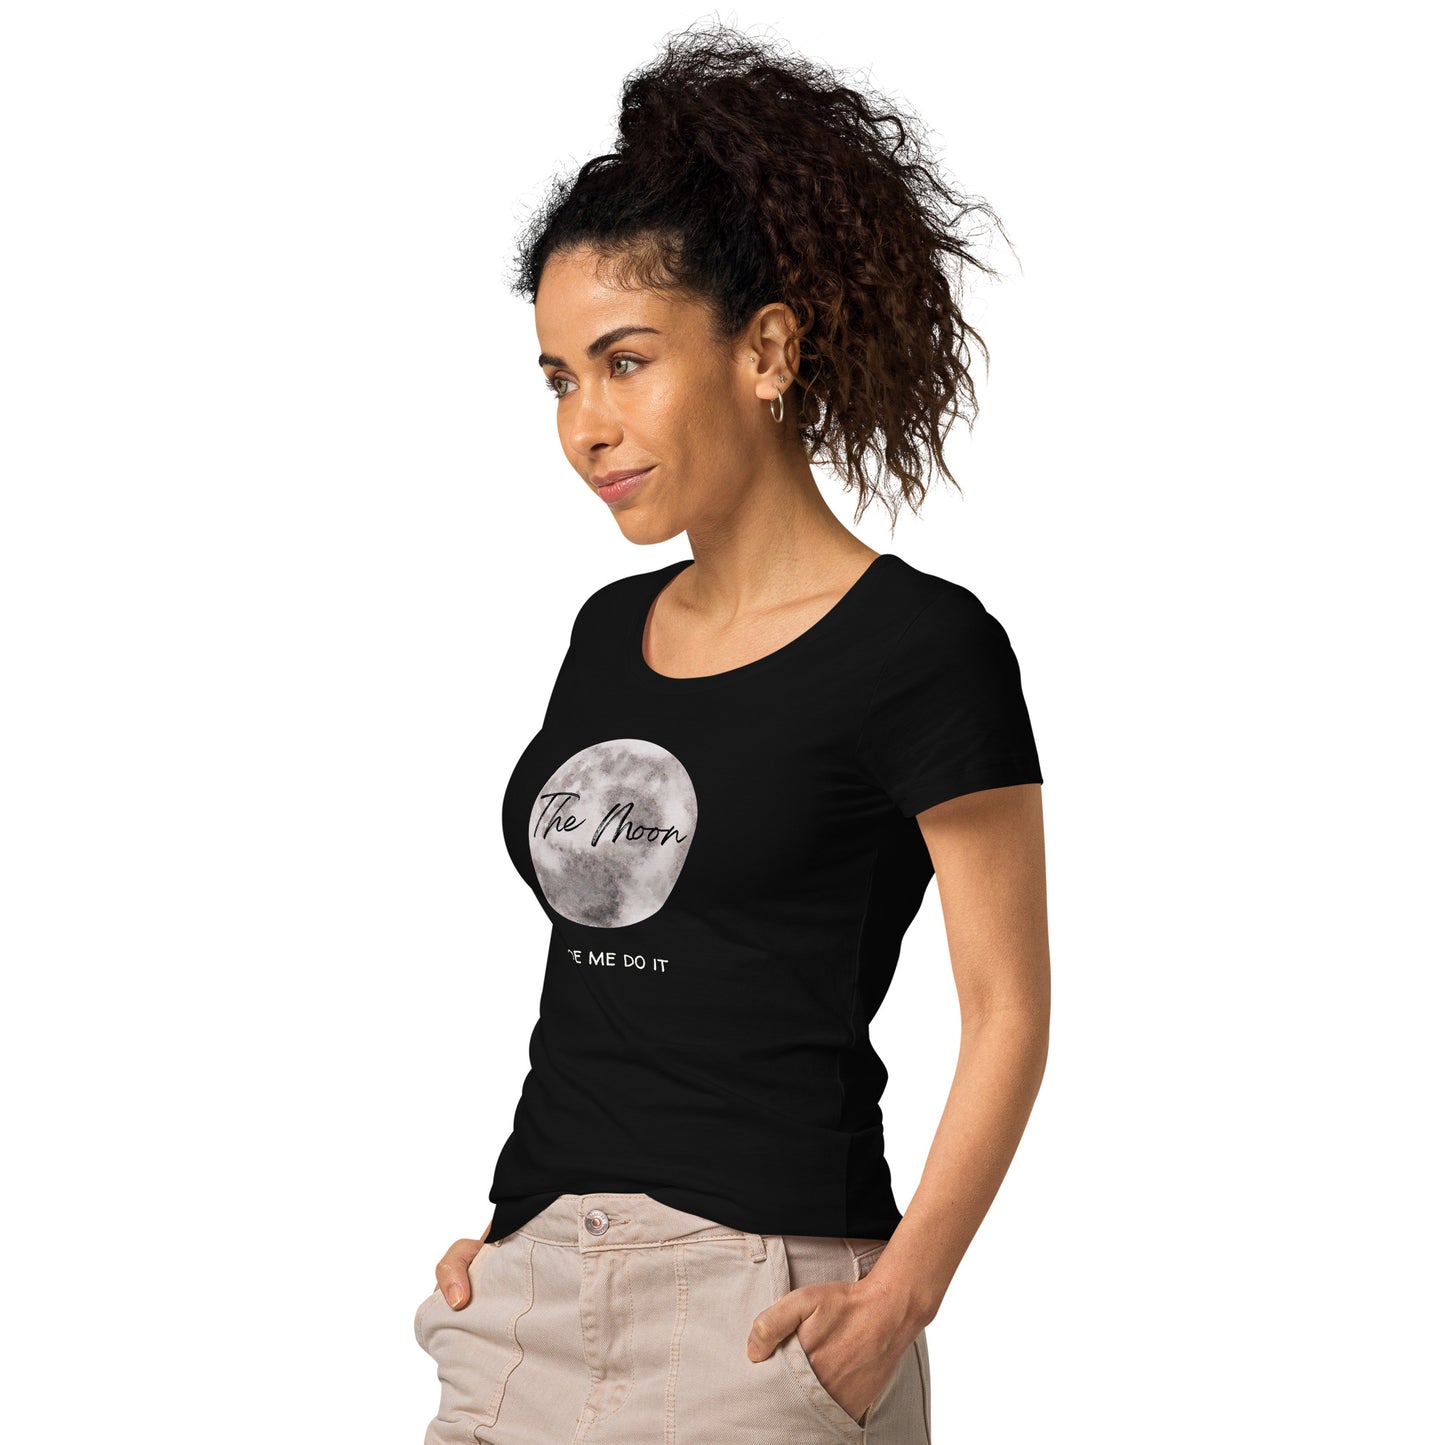 The Moon made me do it, t-shirt